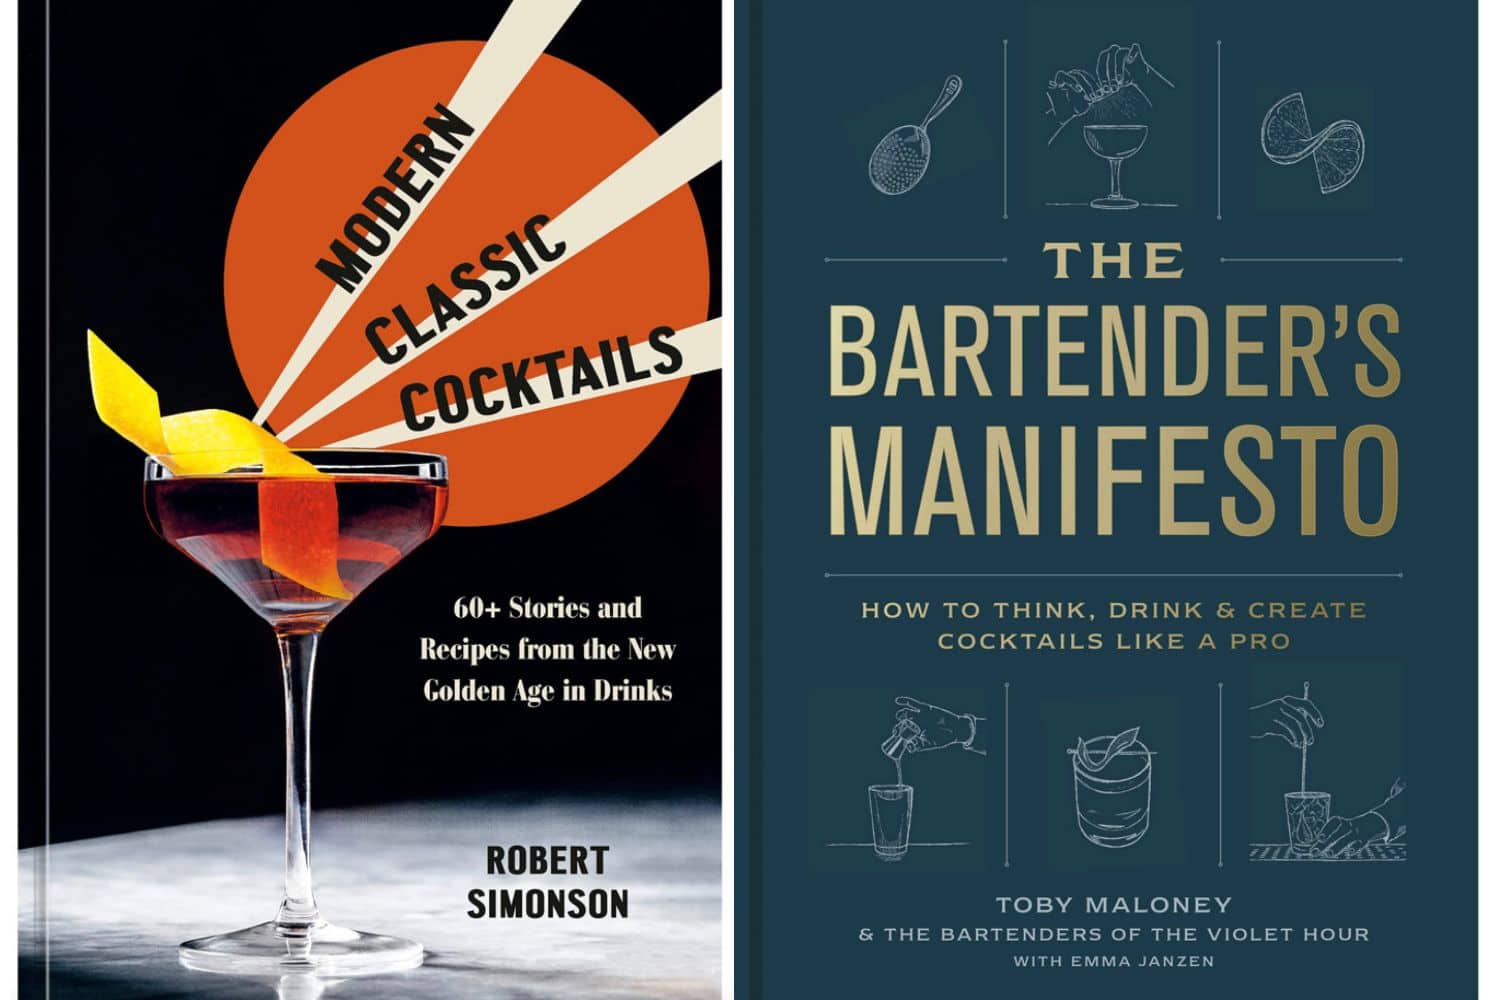 13 Best Cocktail Recipe Books 2021 to Impress Dinner Guests